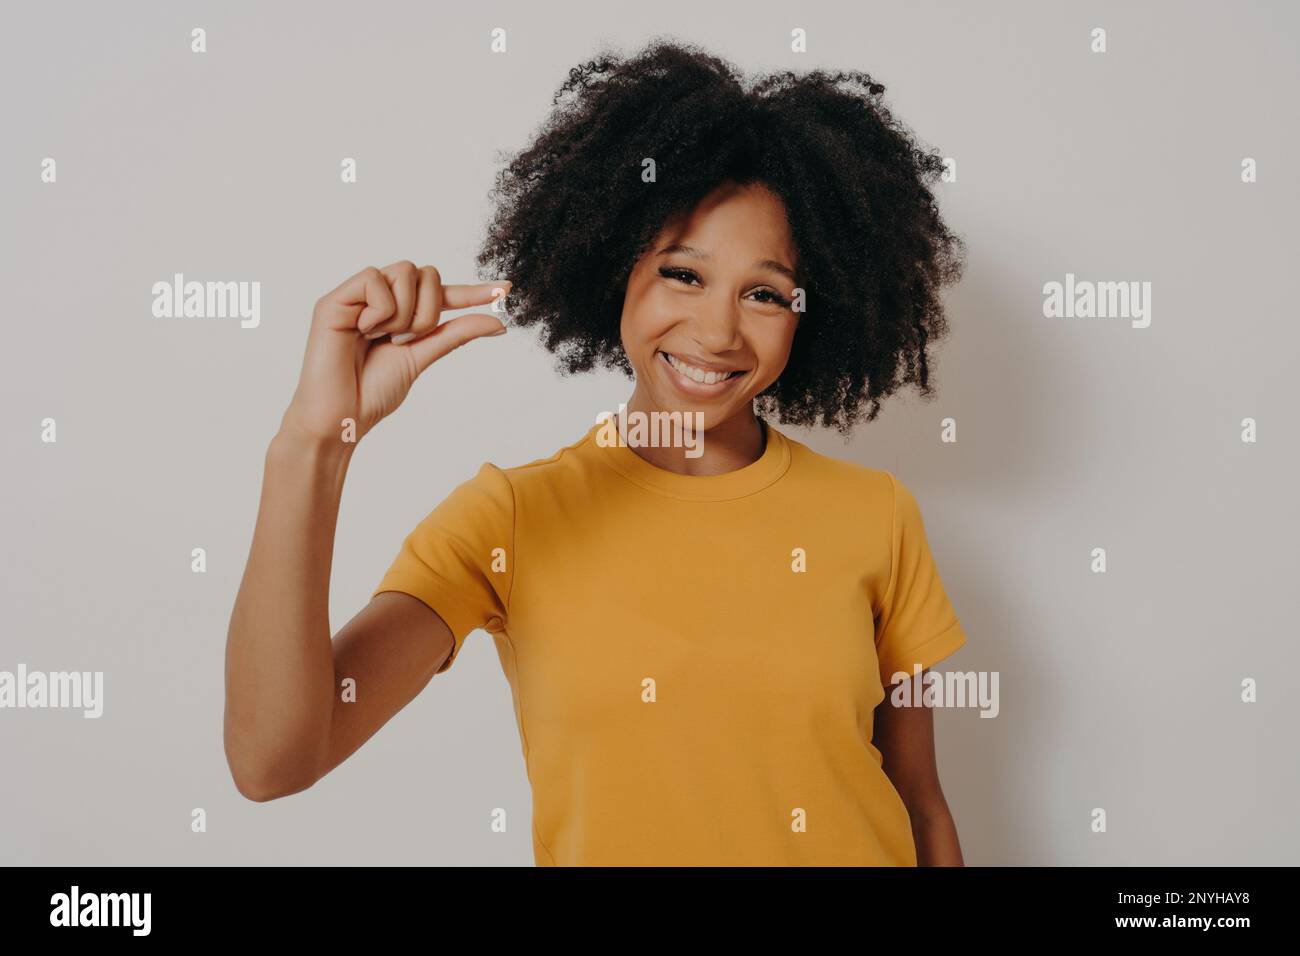 Cheerful smiling African American woman gestures small size with fingers, asks for little bit time, or measures too small object, shows something mini Stock Photo